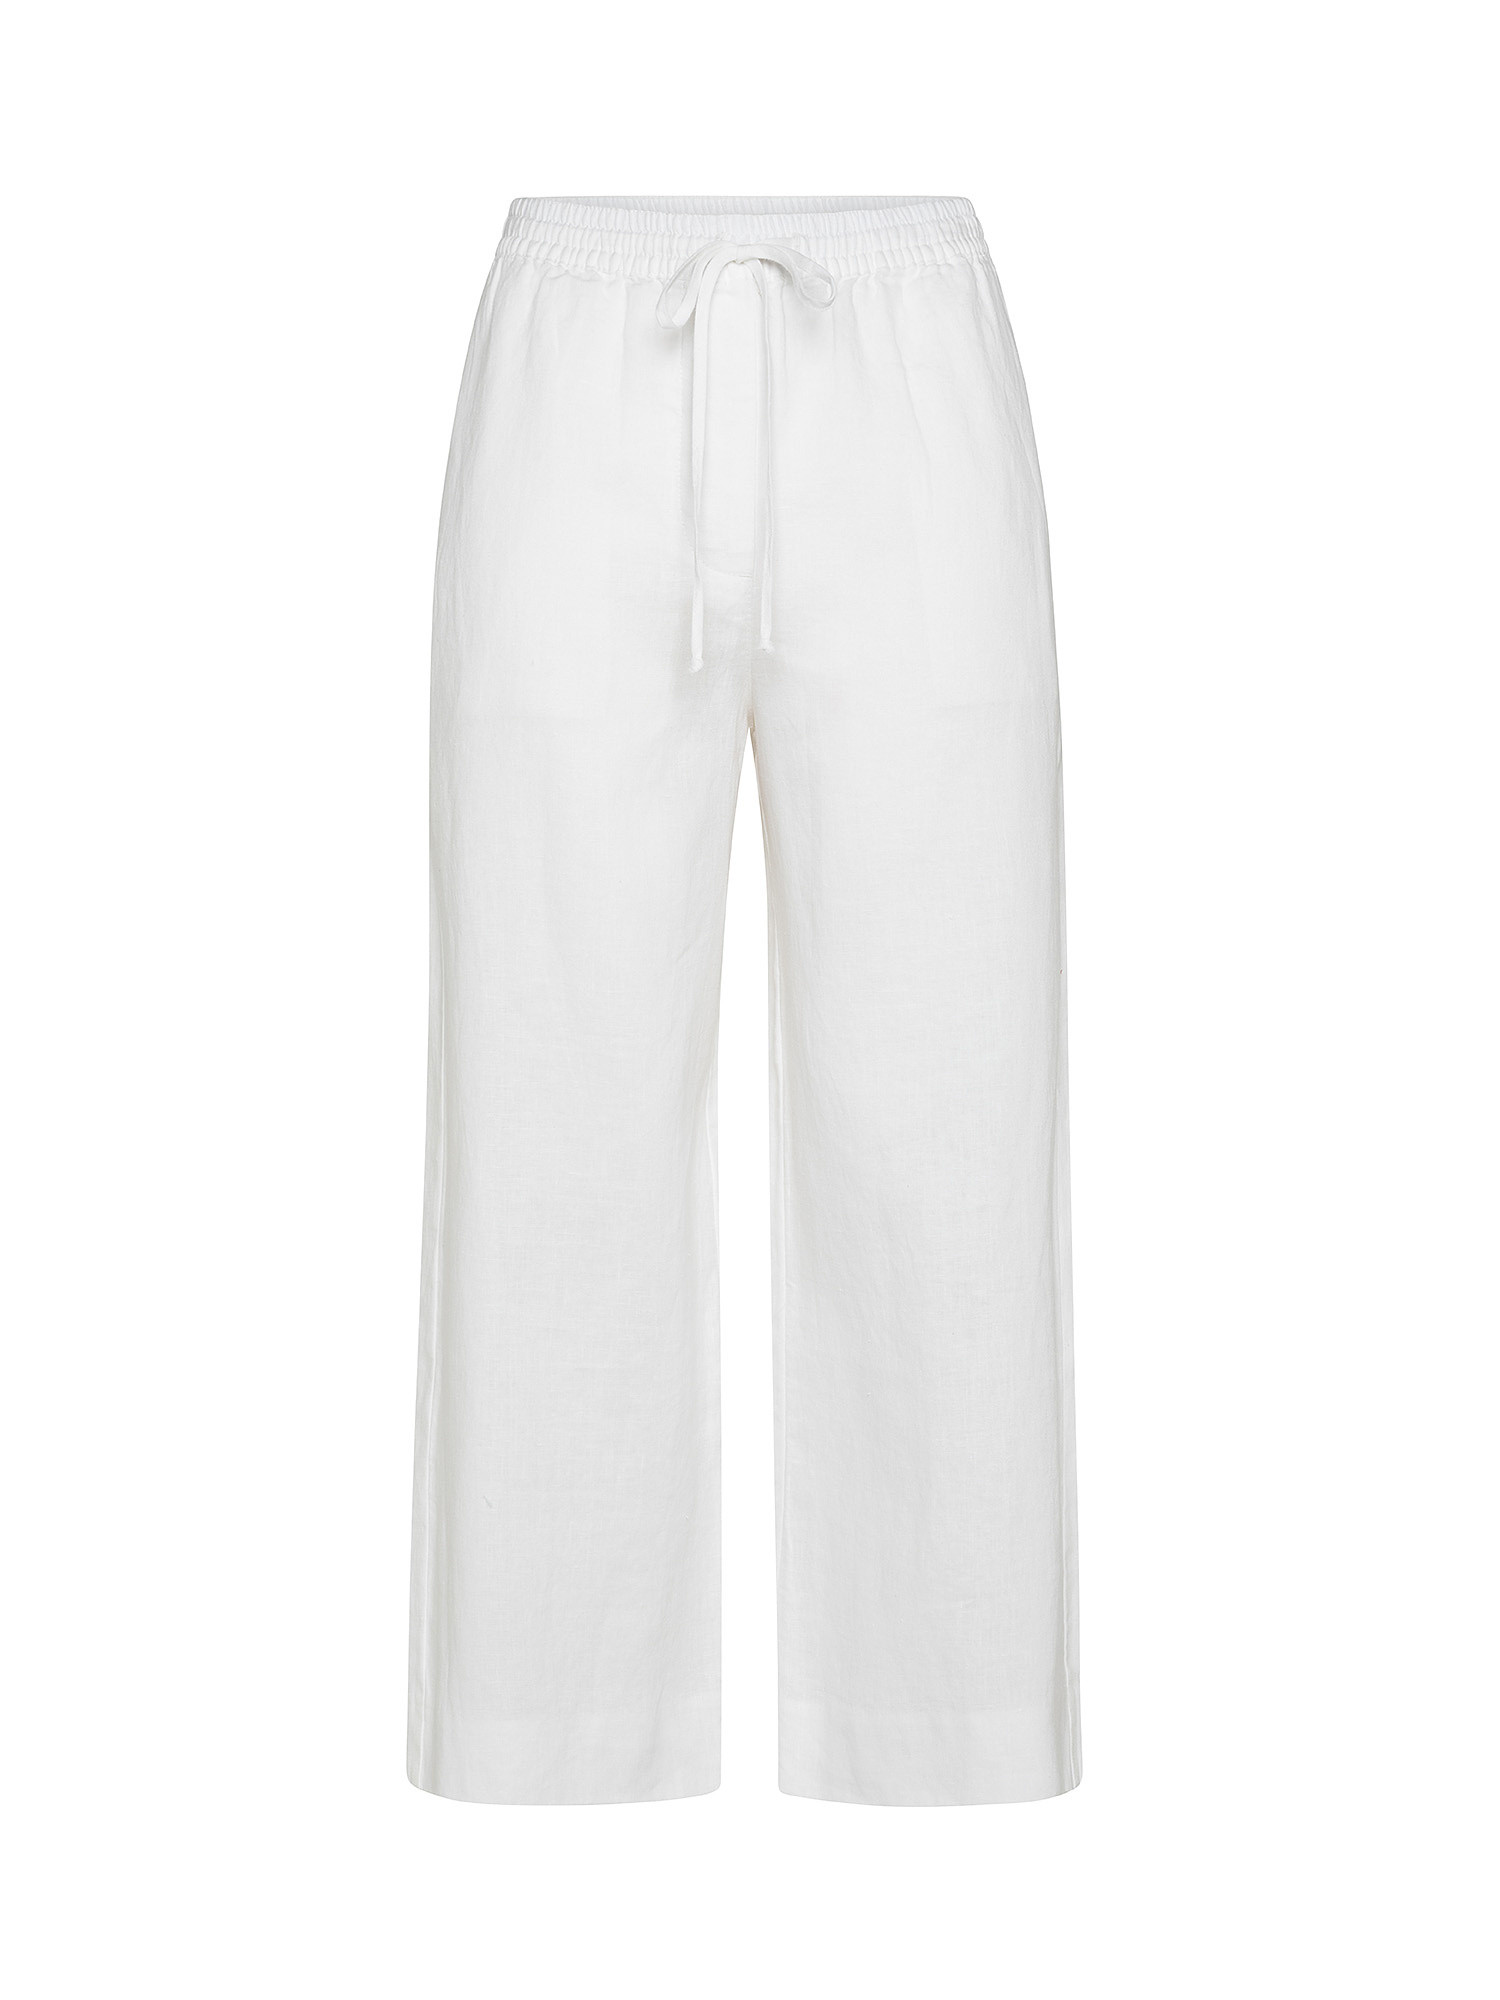 Wide leg linen trousers, White, large image number 0